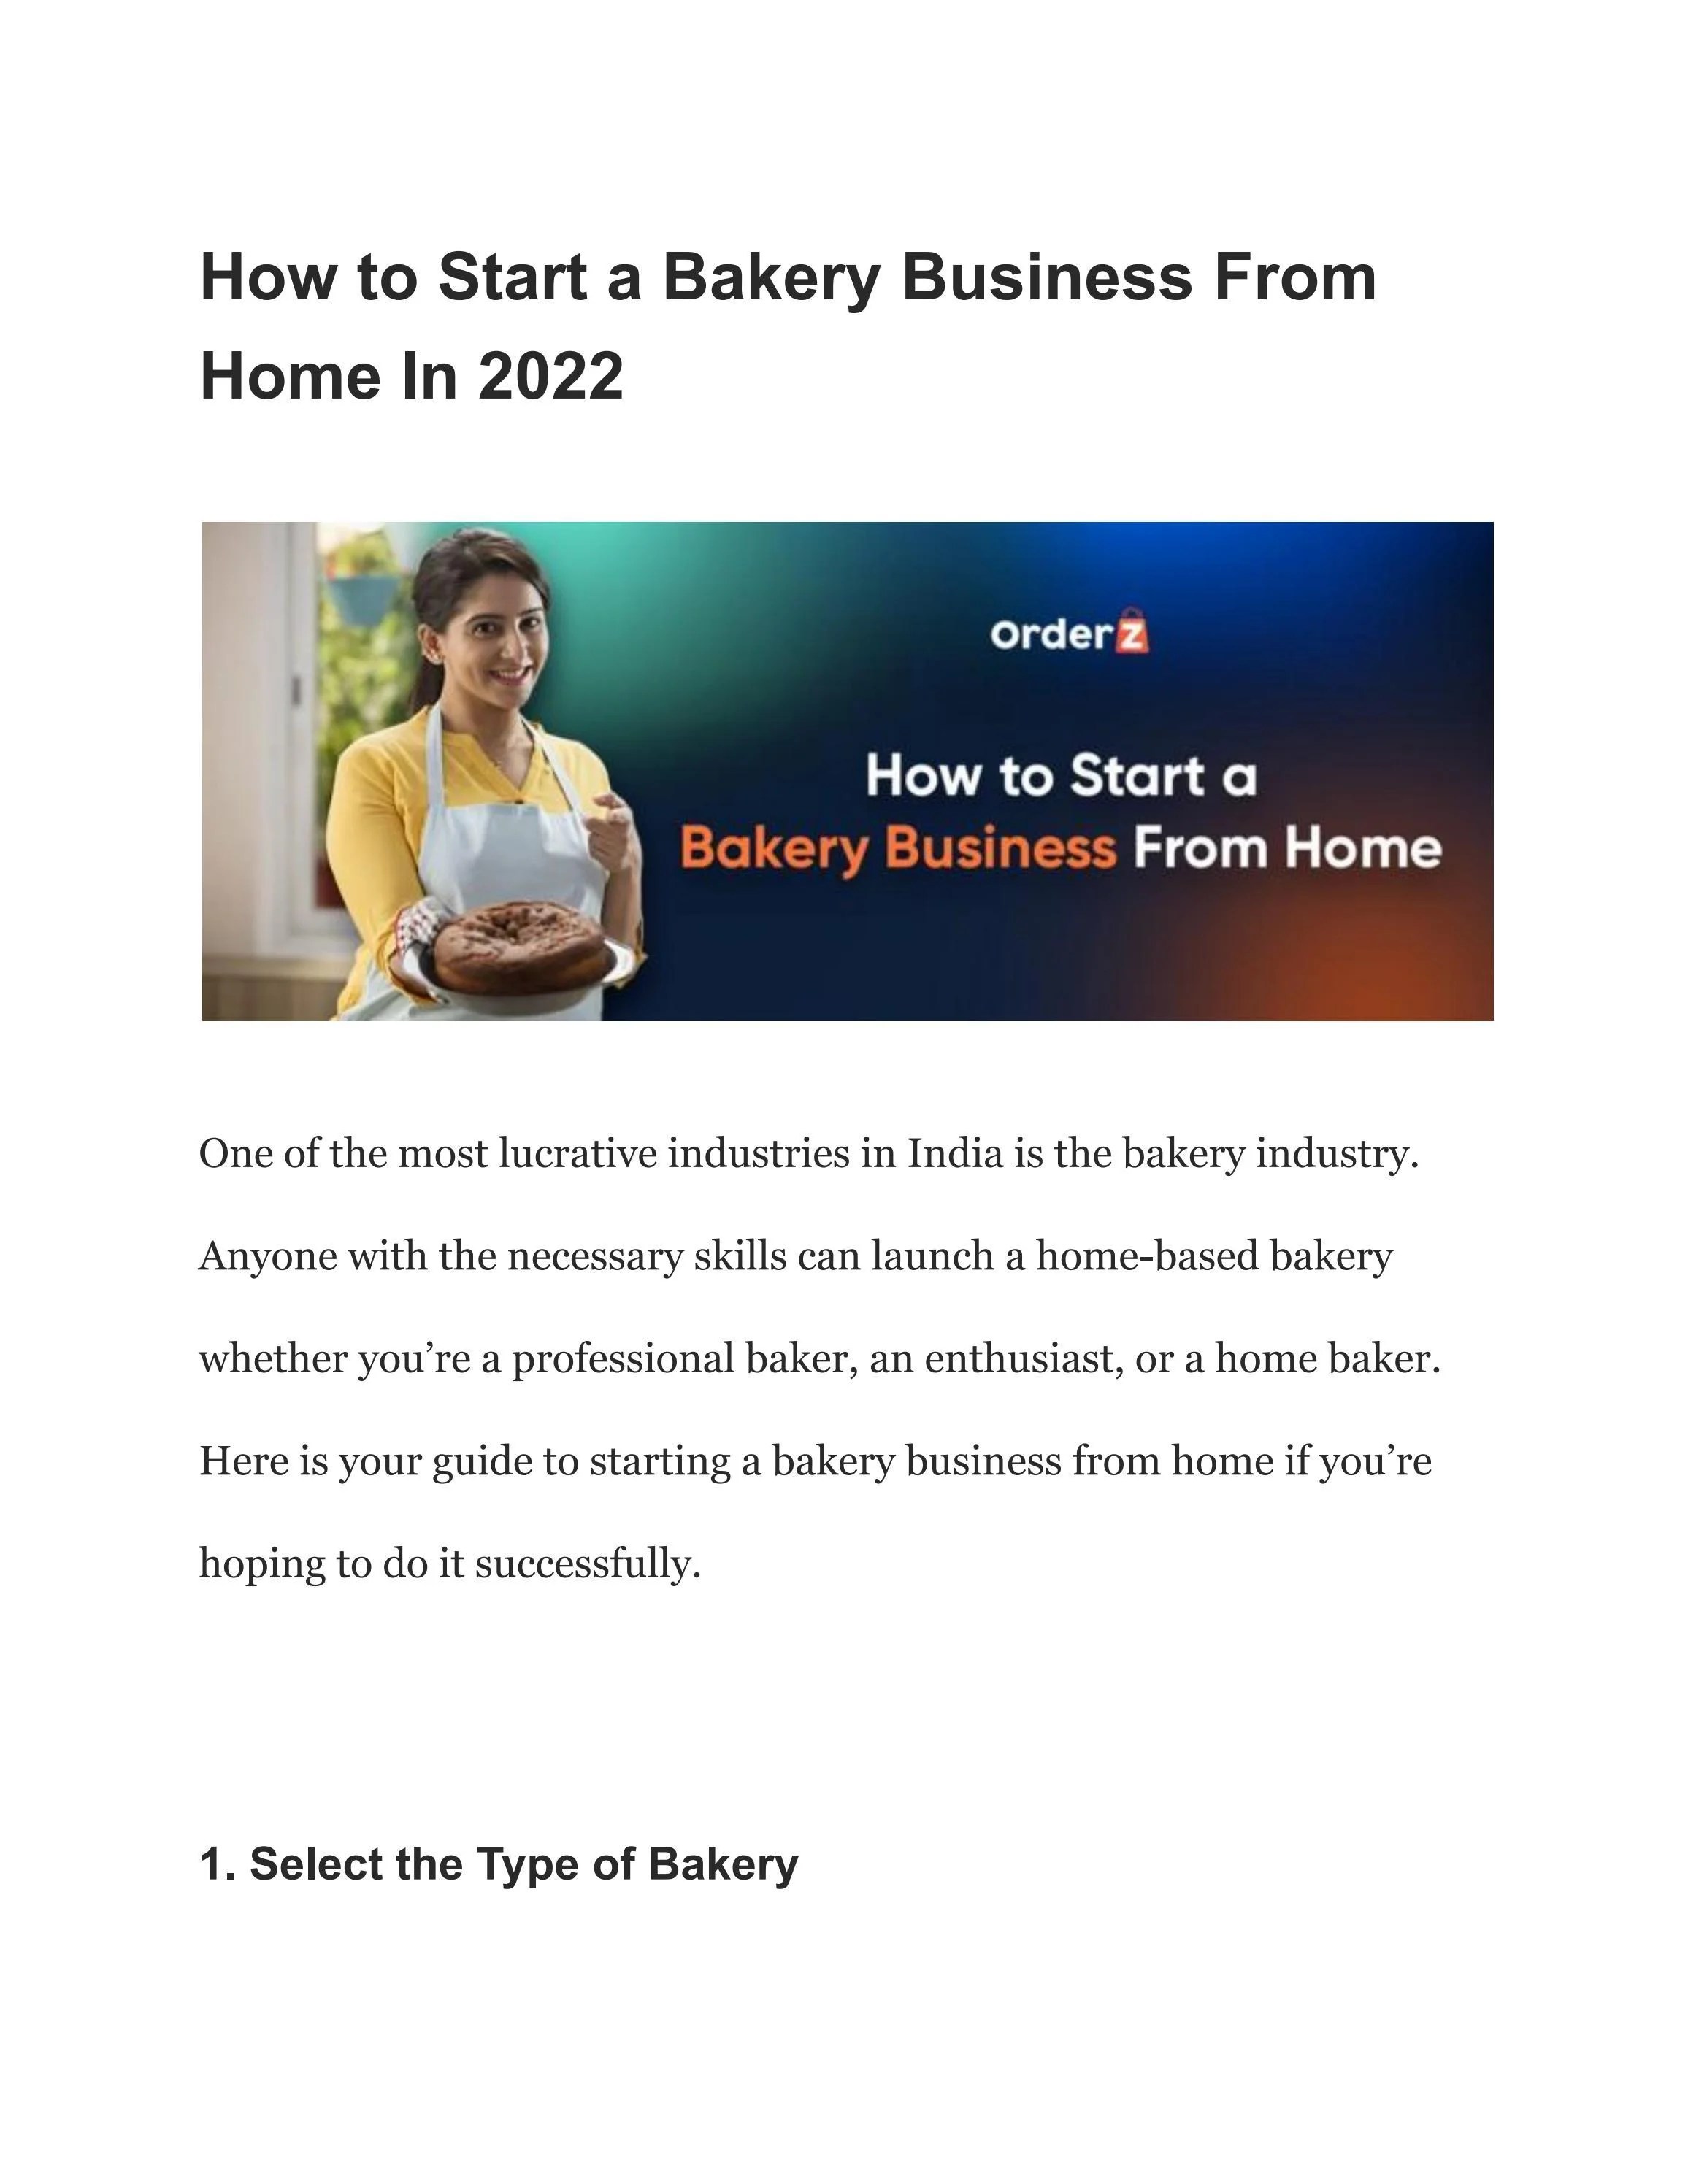 How To Start Bakery Business From Home